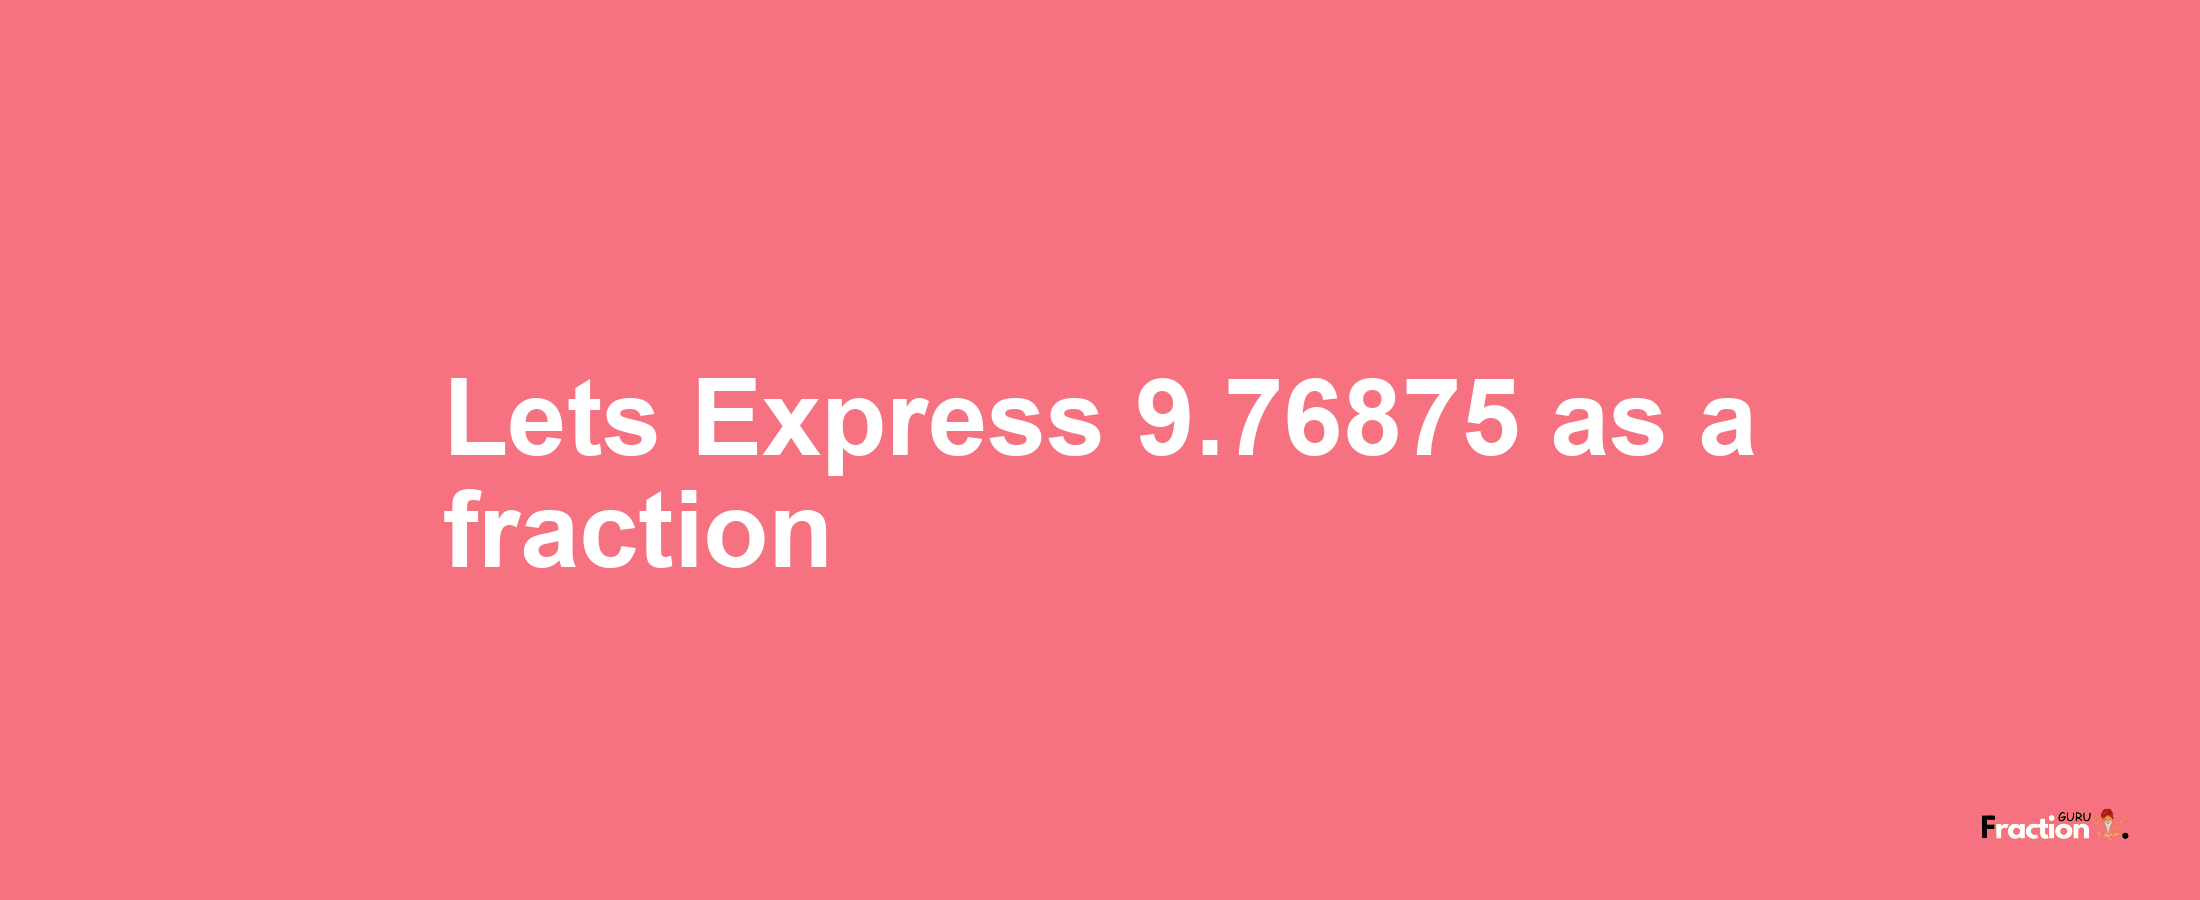 Lets Express 9.76875 as afraction